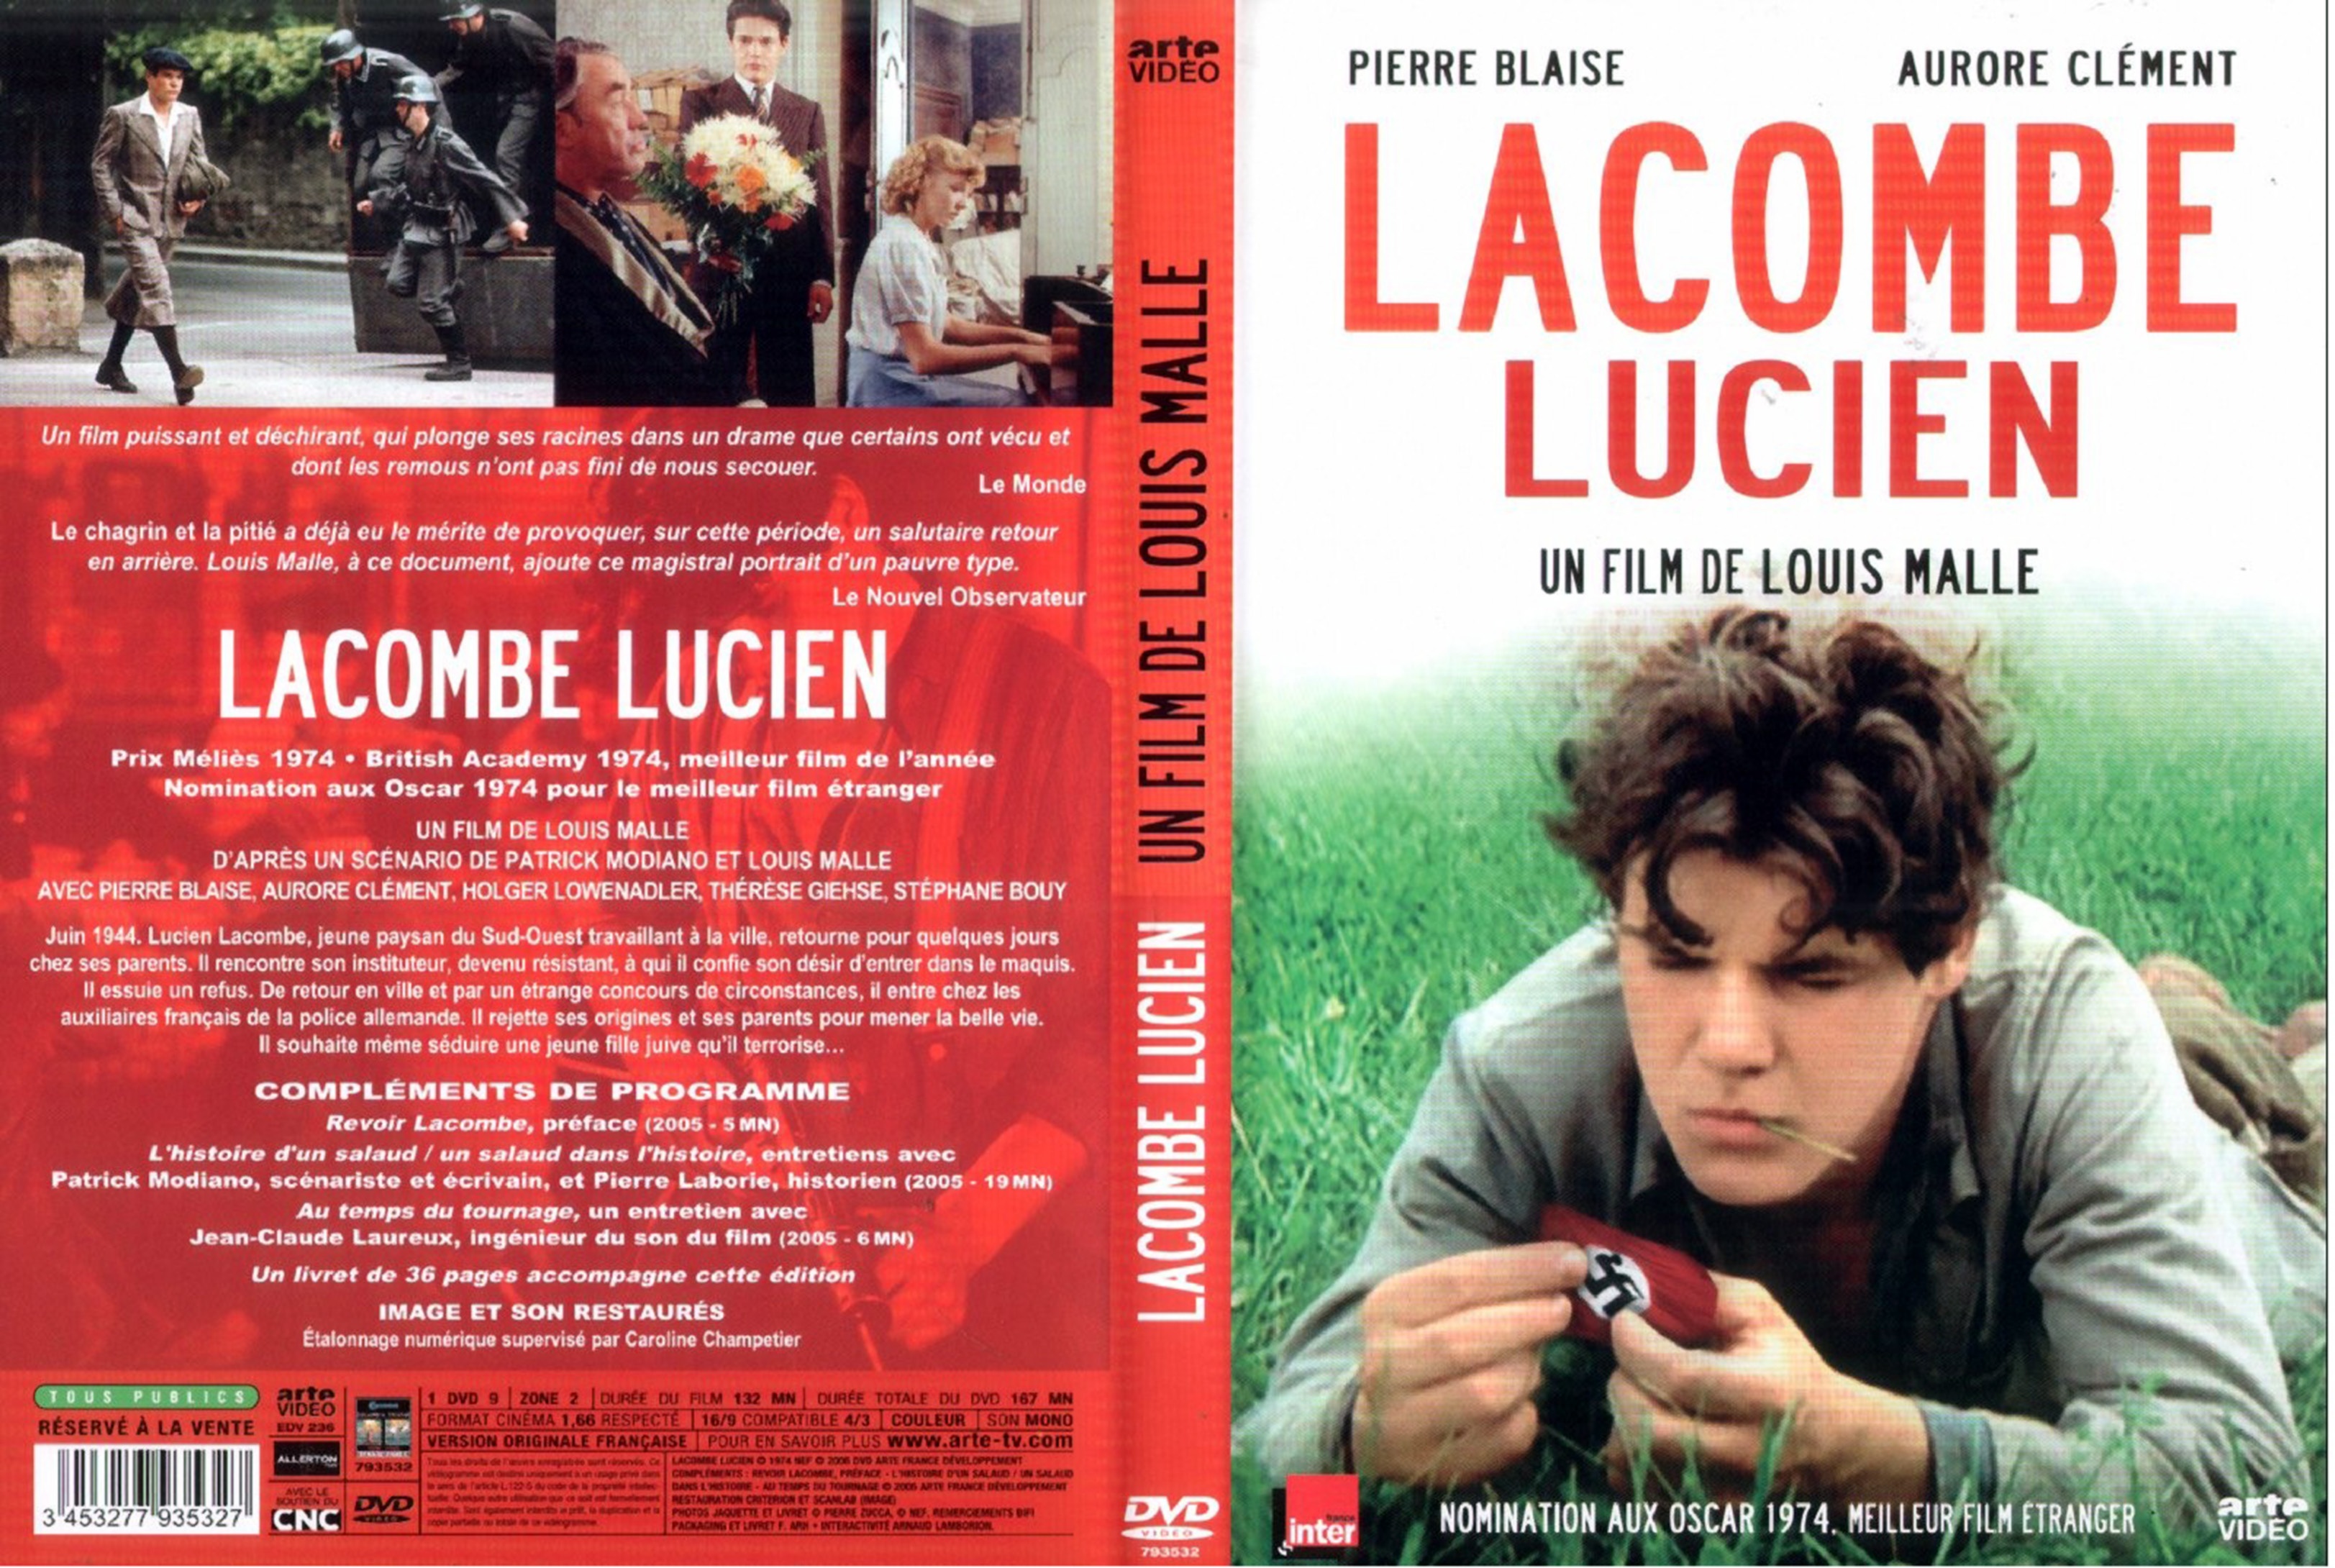 Jaquette DVD Lacombe Lucien